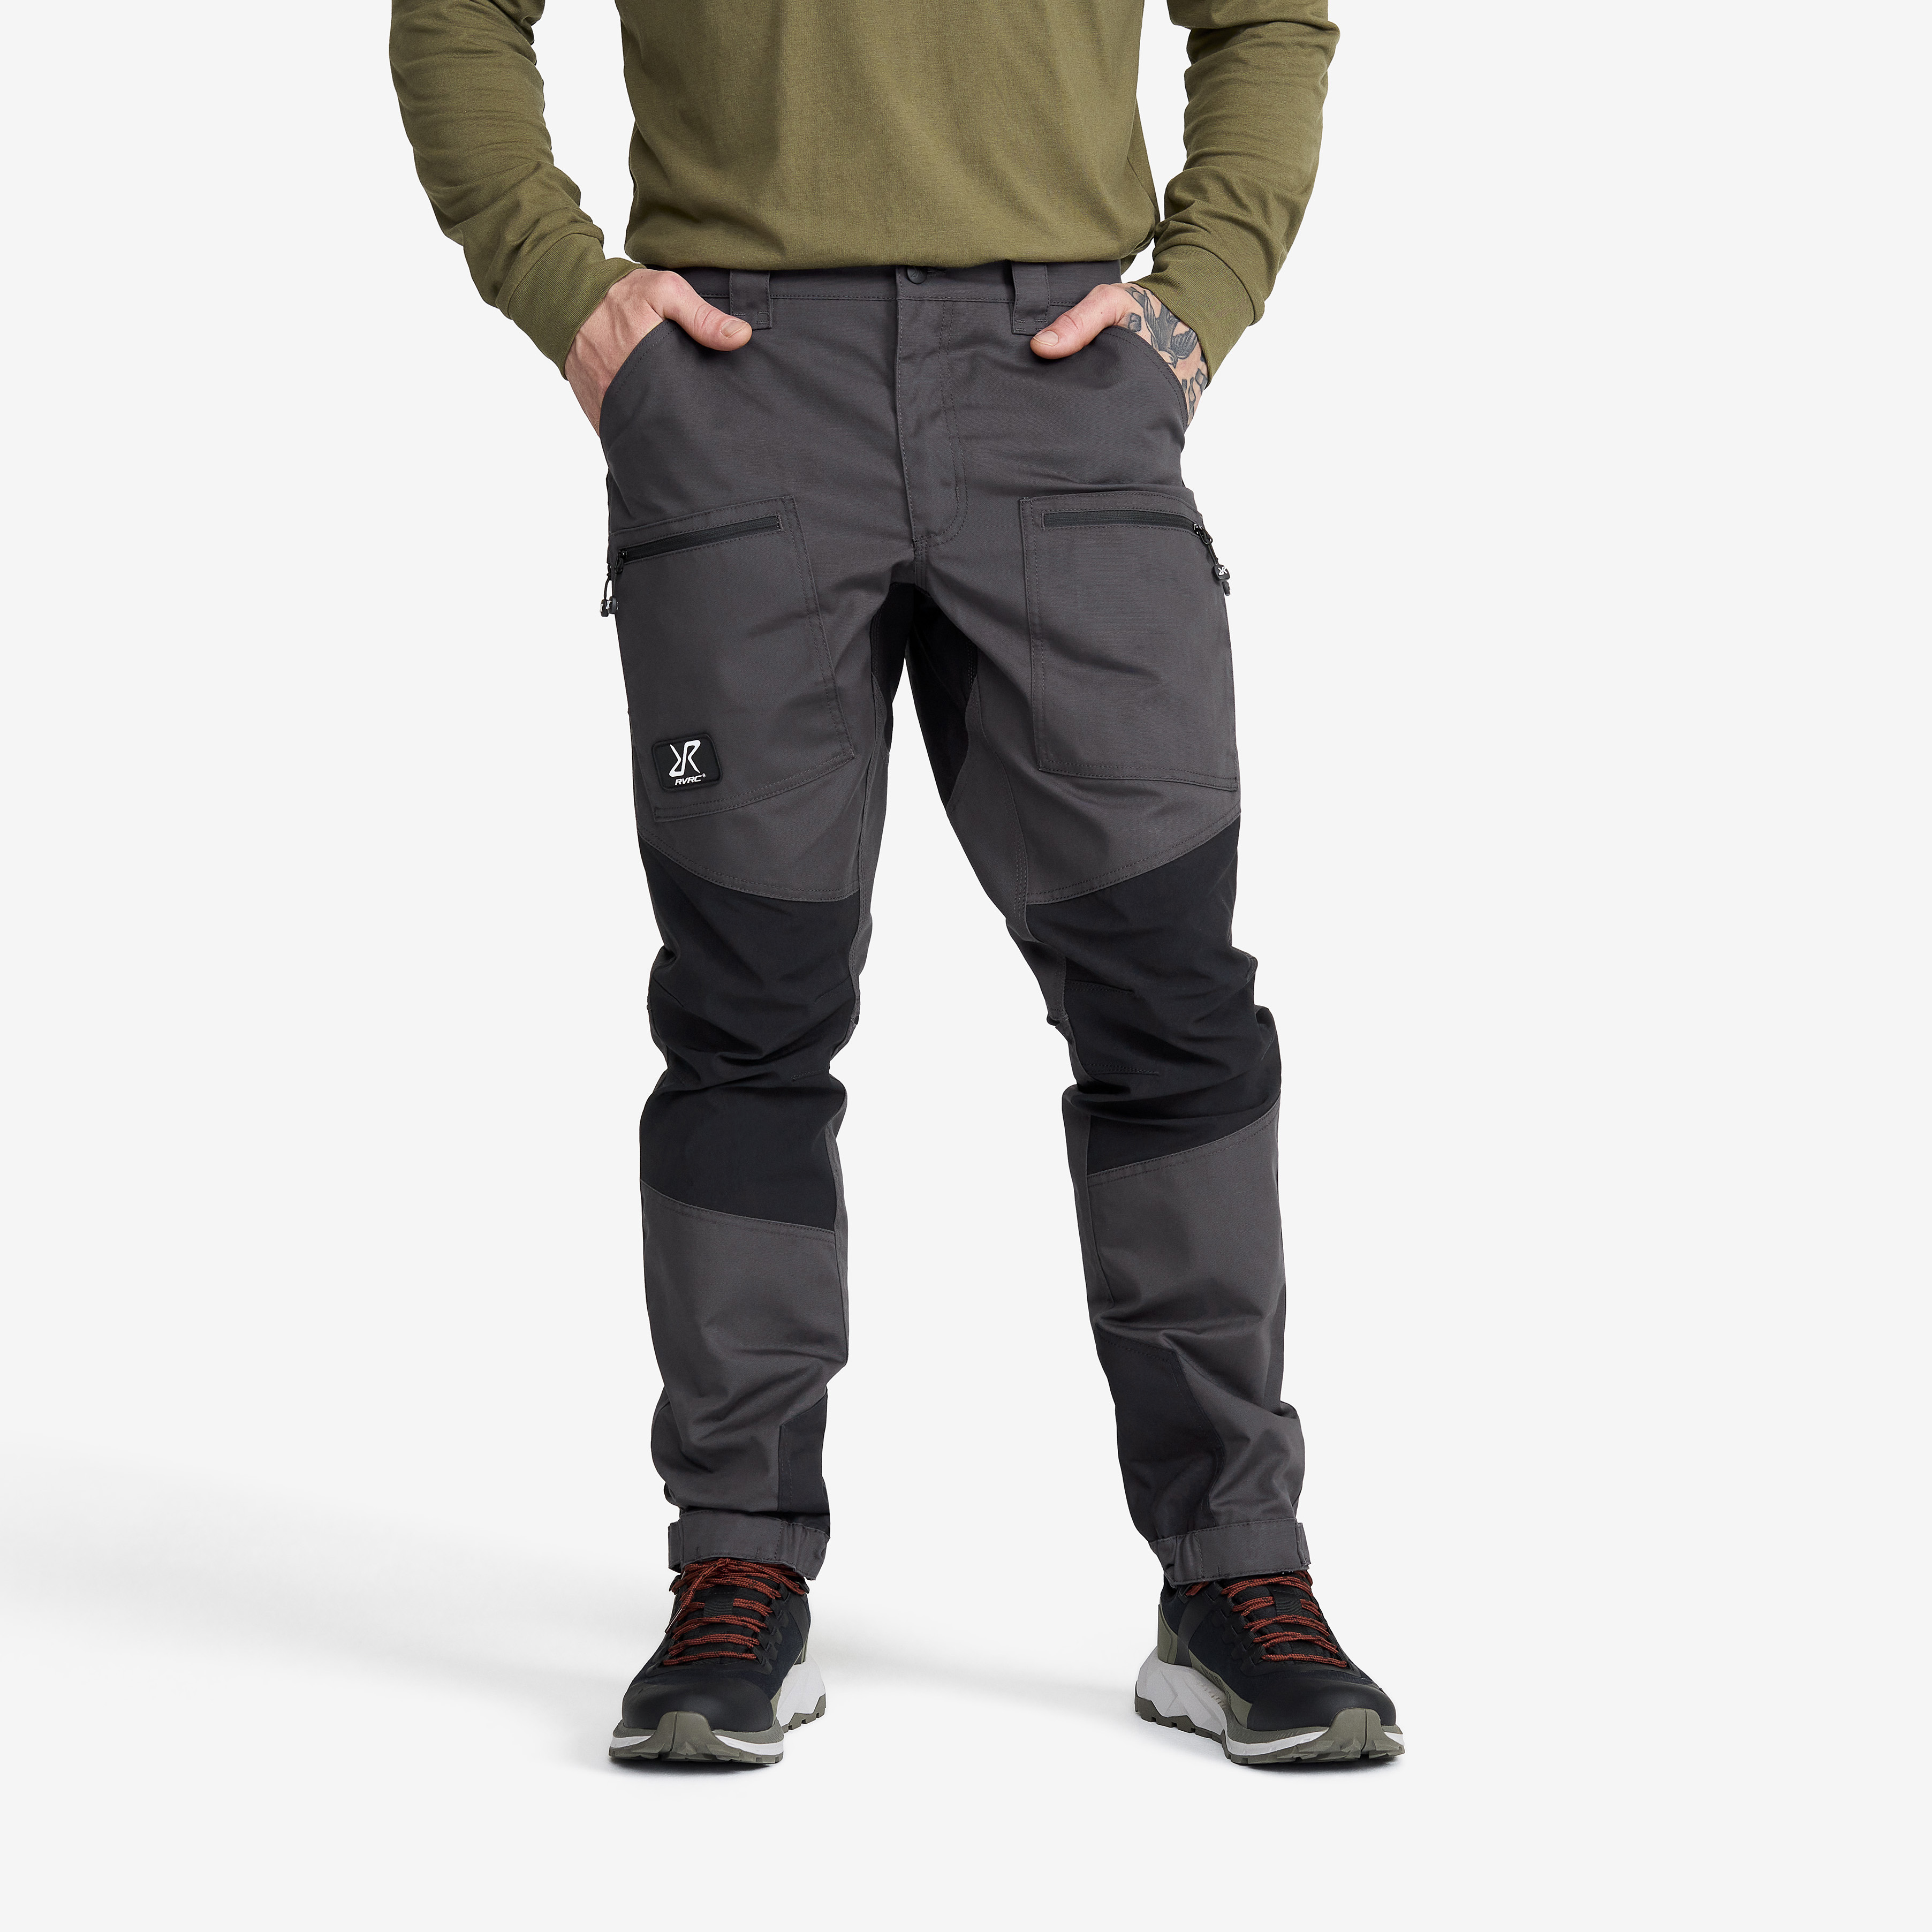 Nordwand Pro hiking trousers for men in dark grey